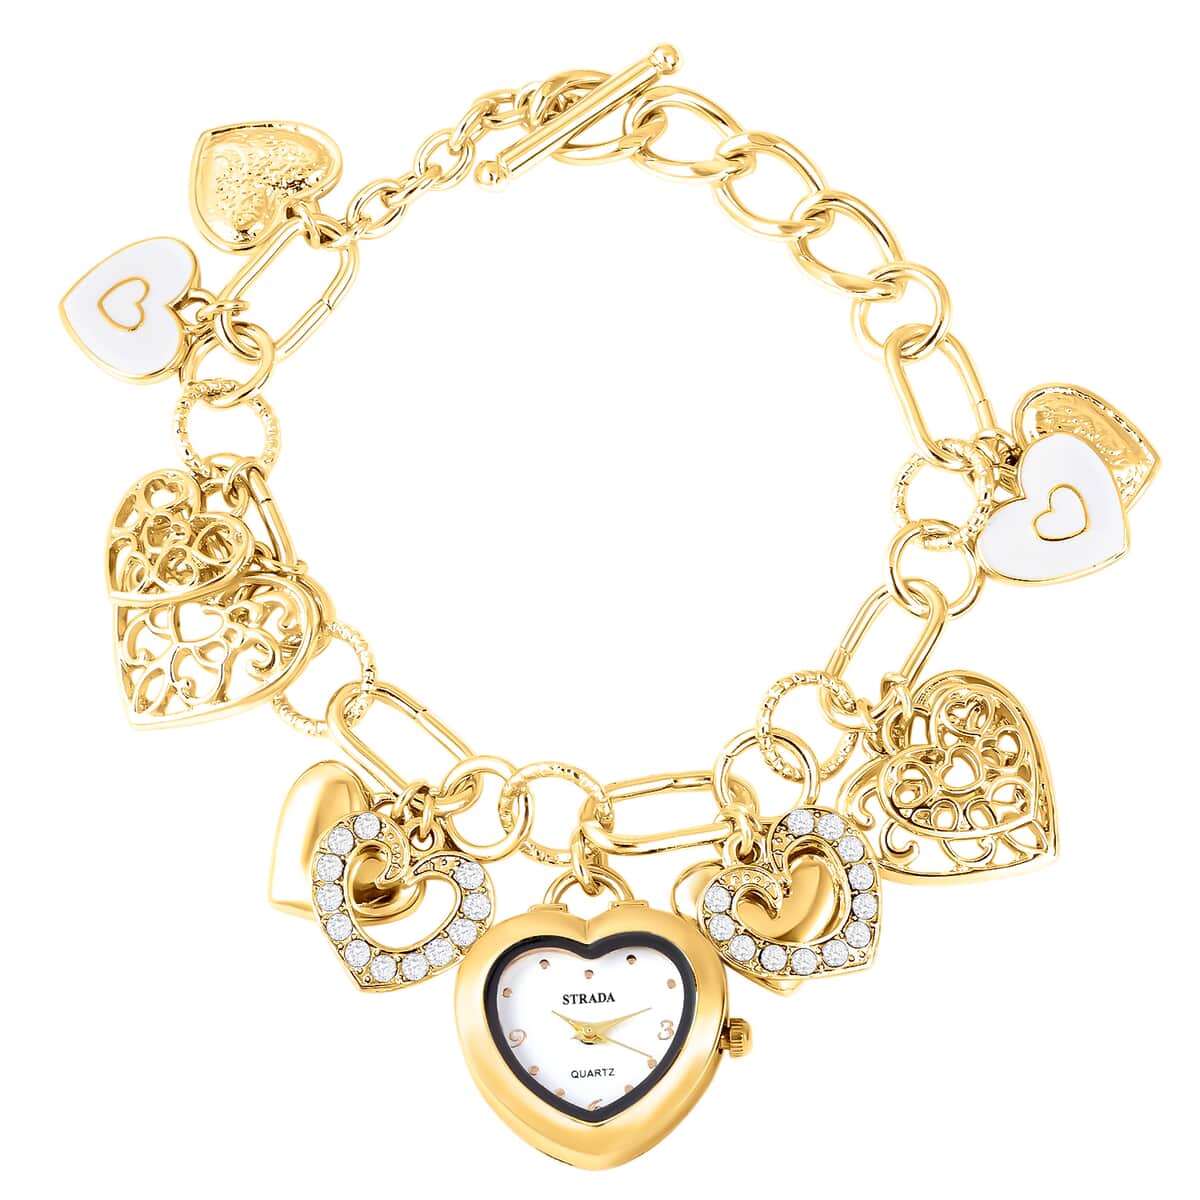 Strada White Austrian Crystal, Enameled Japanese Movement Charm Heart Bracelet Watch in Goldtone (7.5-9 in) image number 0